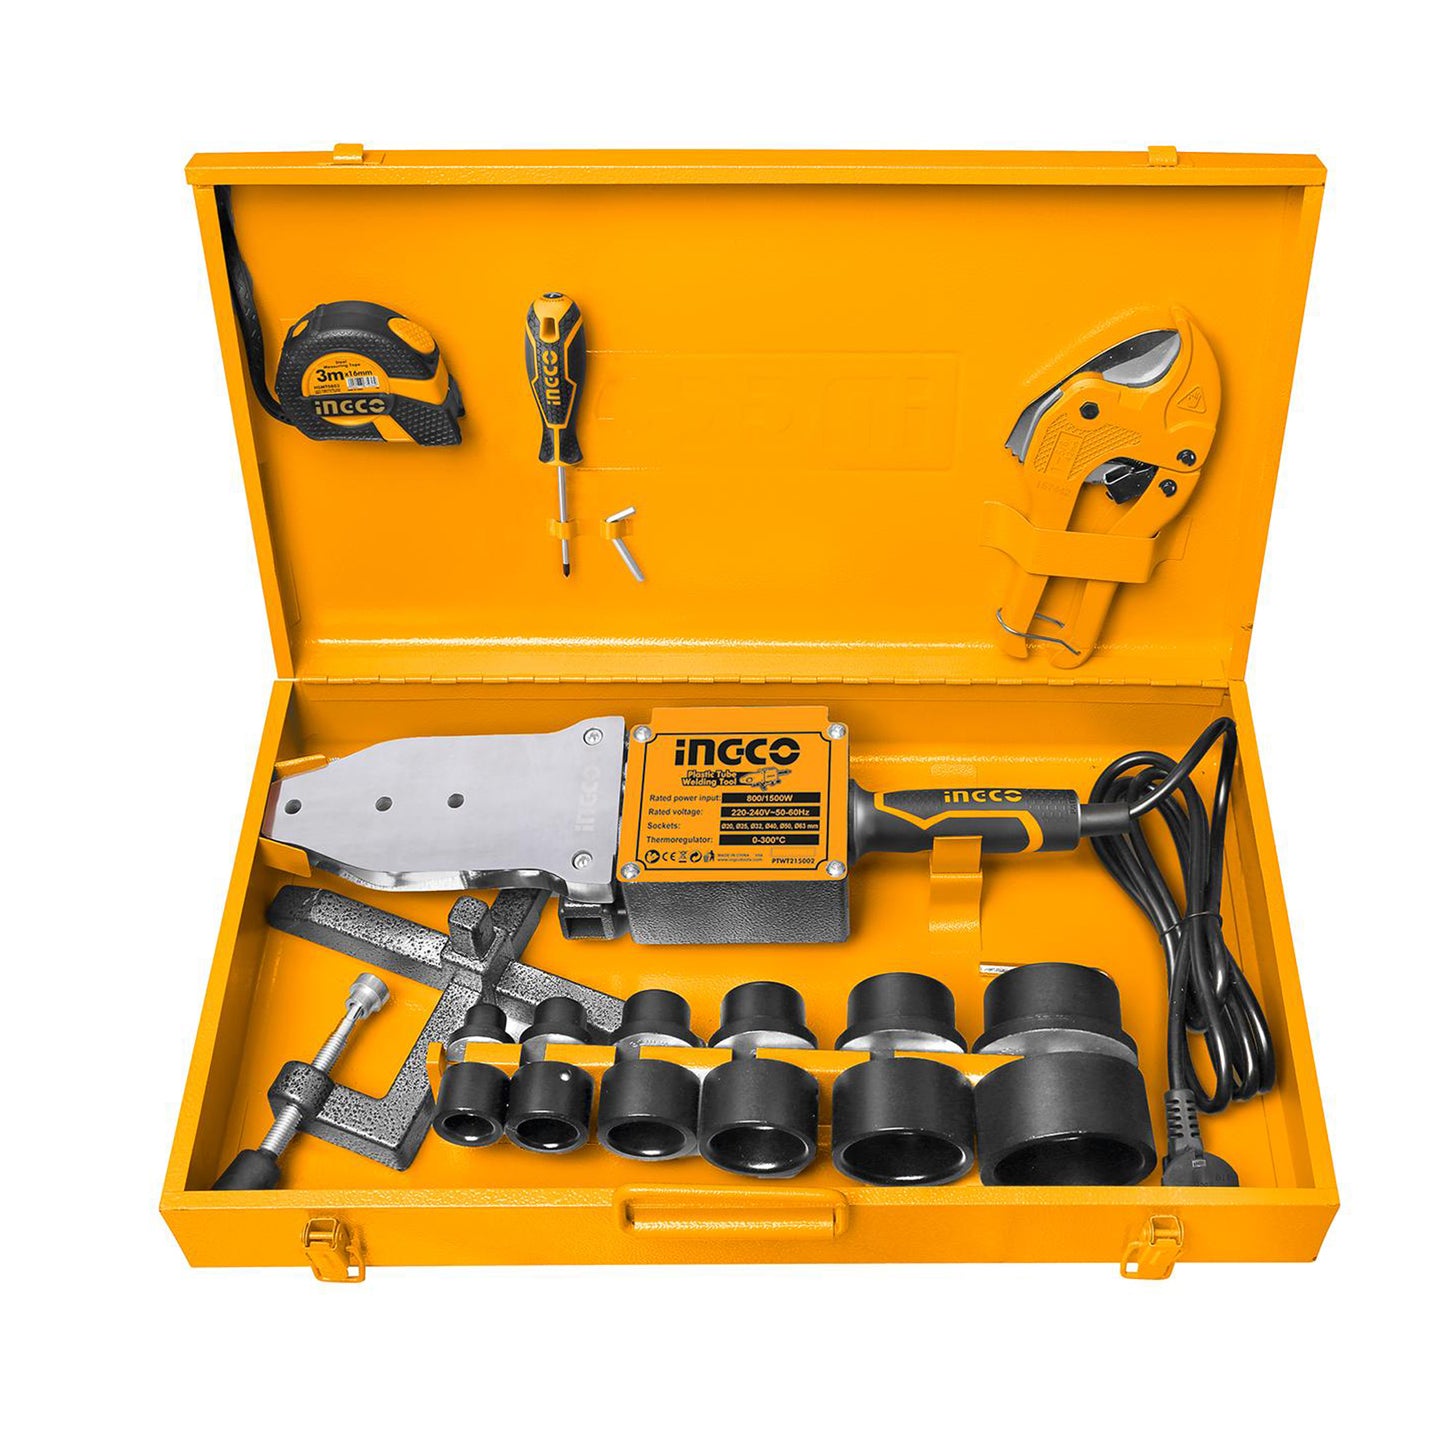 INGCO 1500W Plastic Tube Pipe Fusion Welding Tool Machine with 6pcs Heating Sockets, Measuring Tape, Hex Key, and Screwdriver | PTWT215002